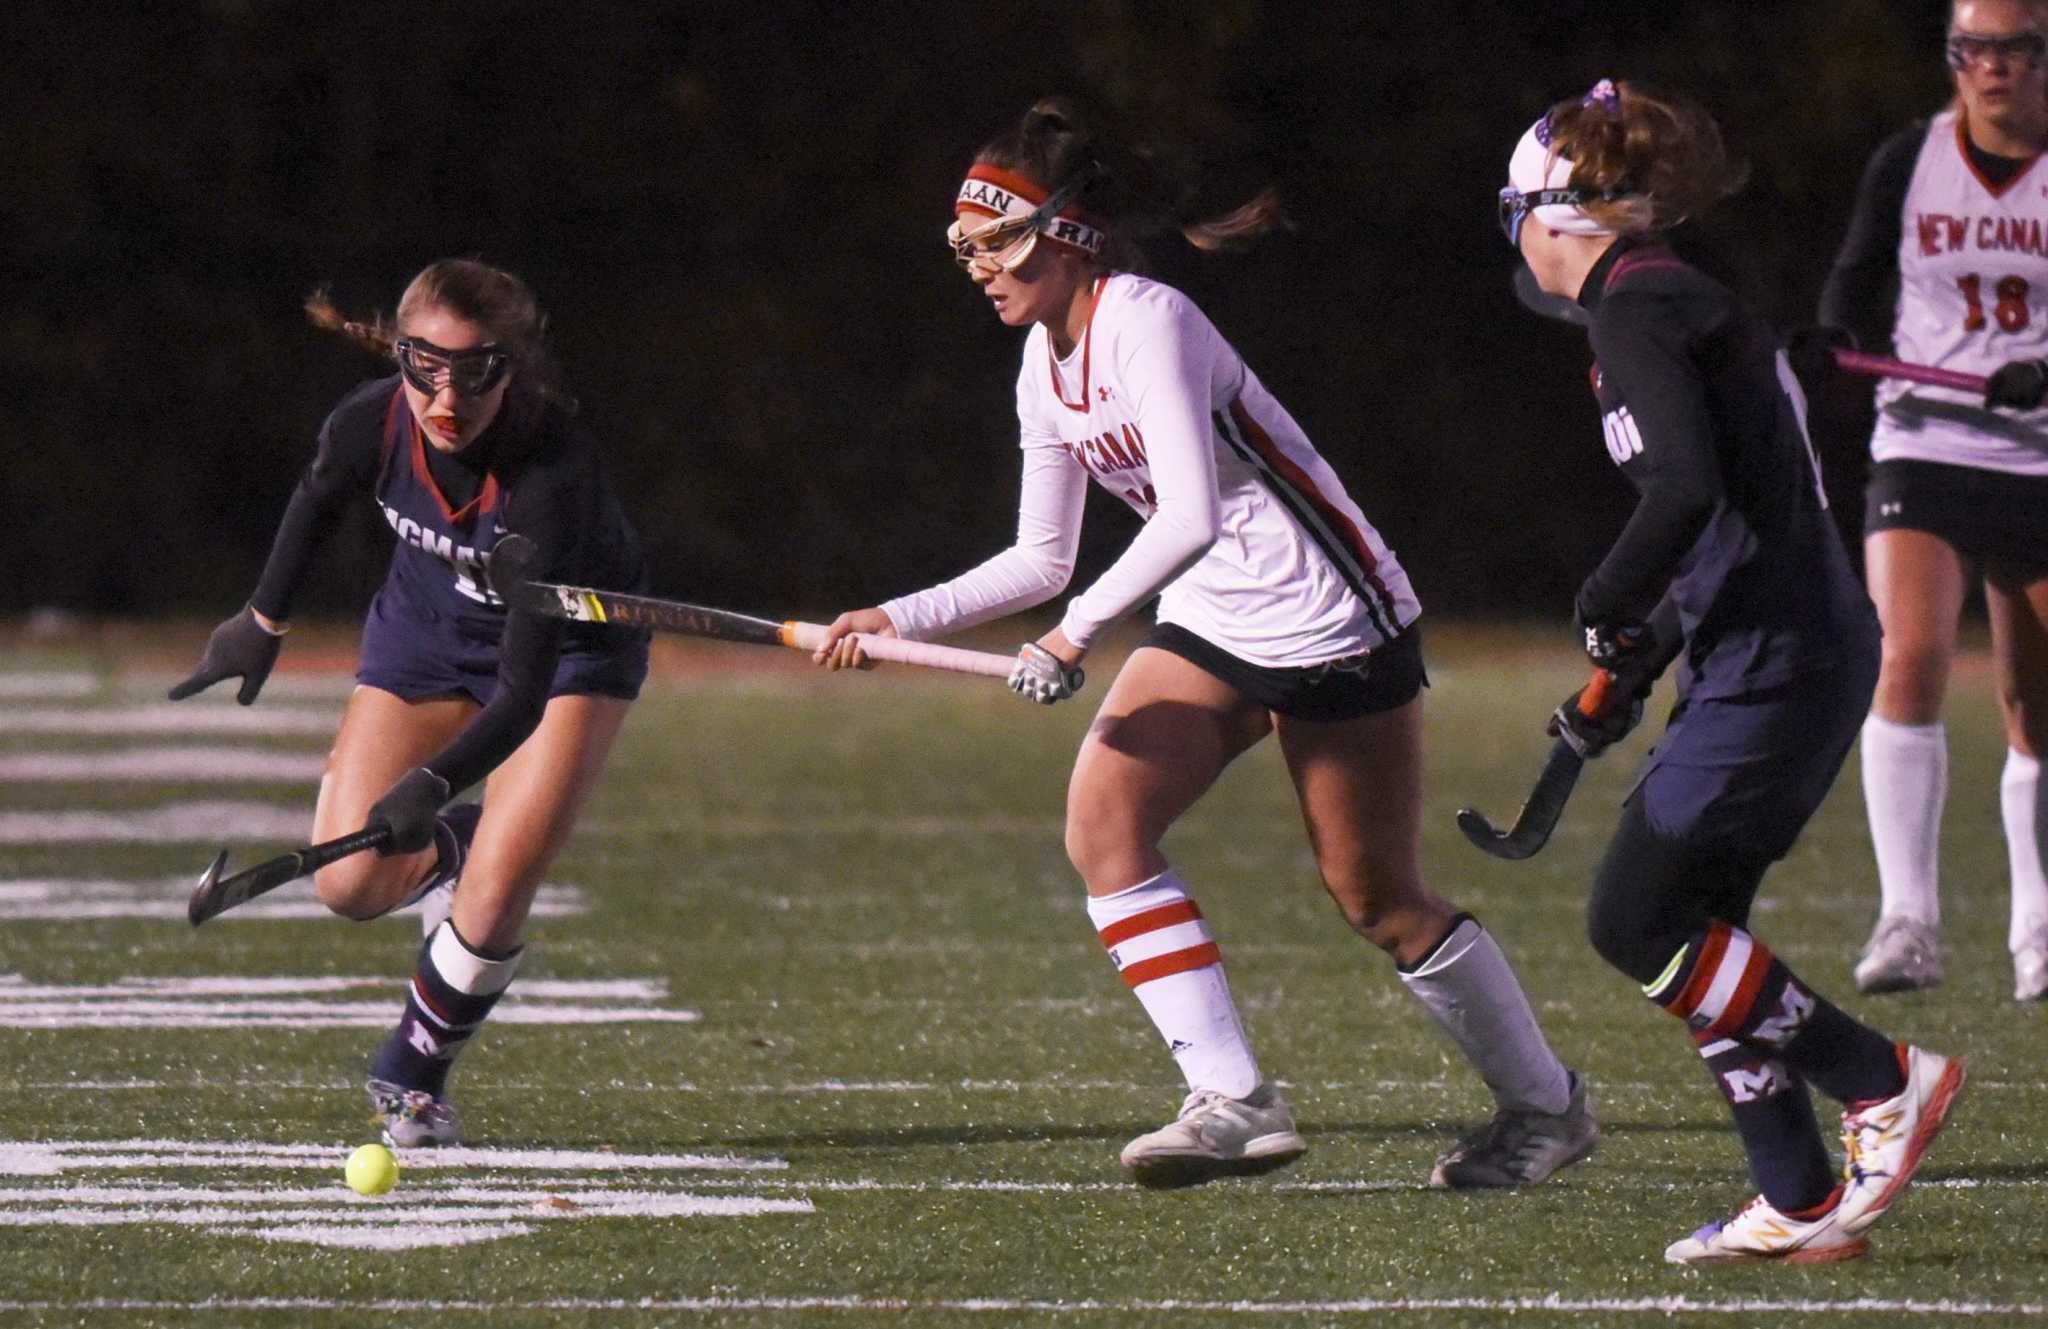 New Canaan blanks McMahon in Class L field hockey - CT Insider